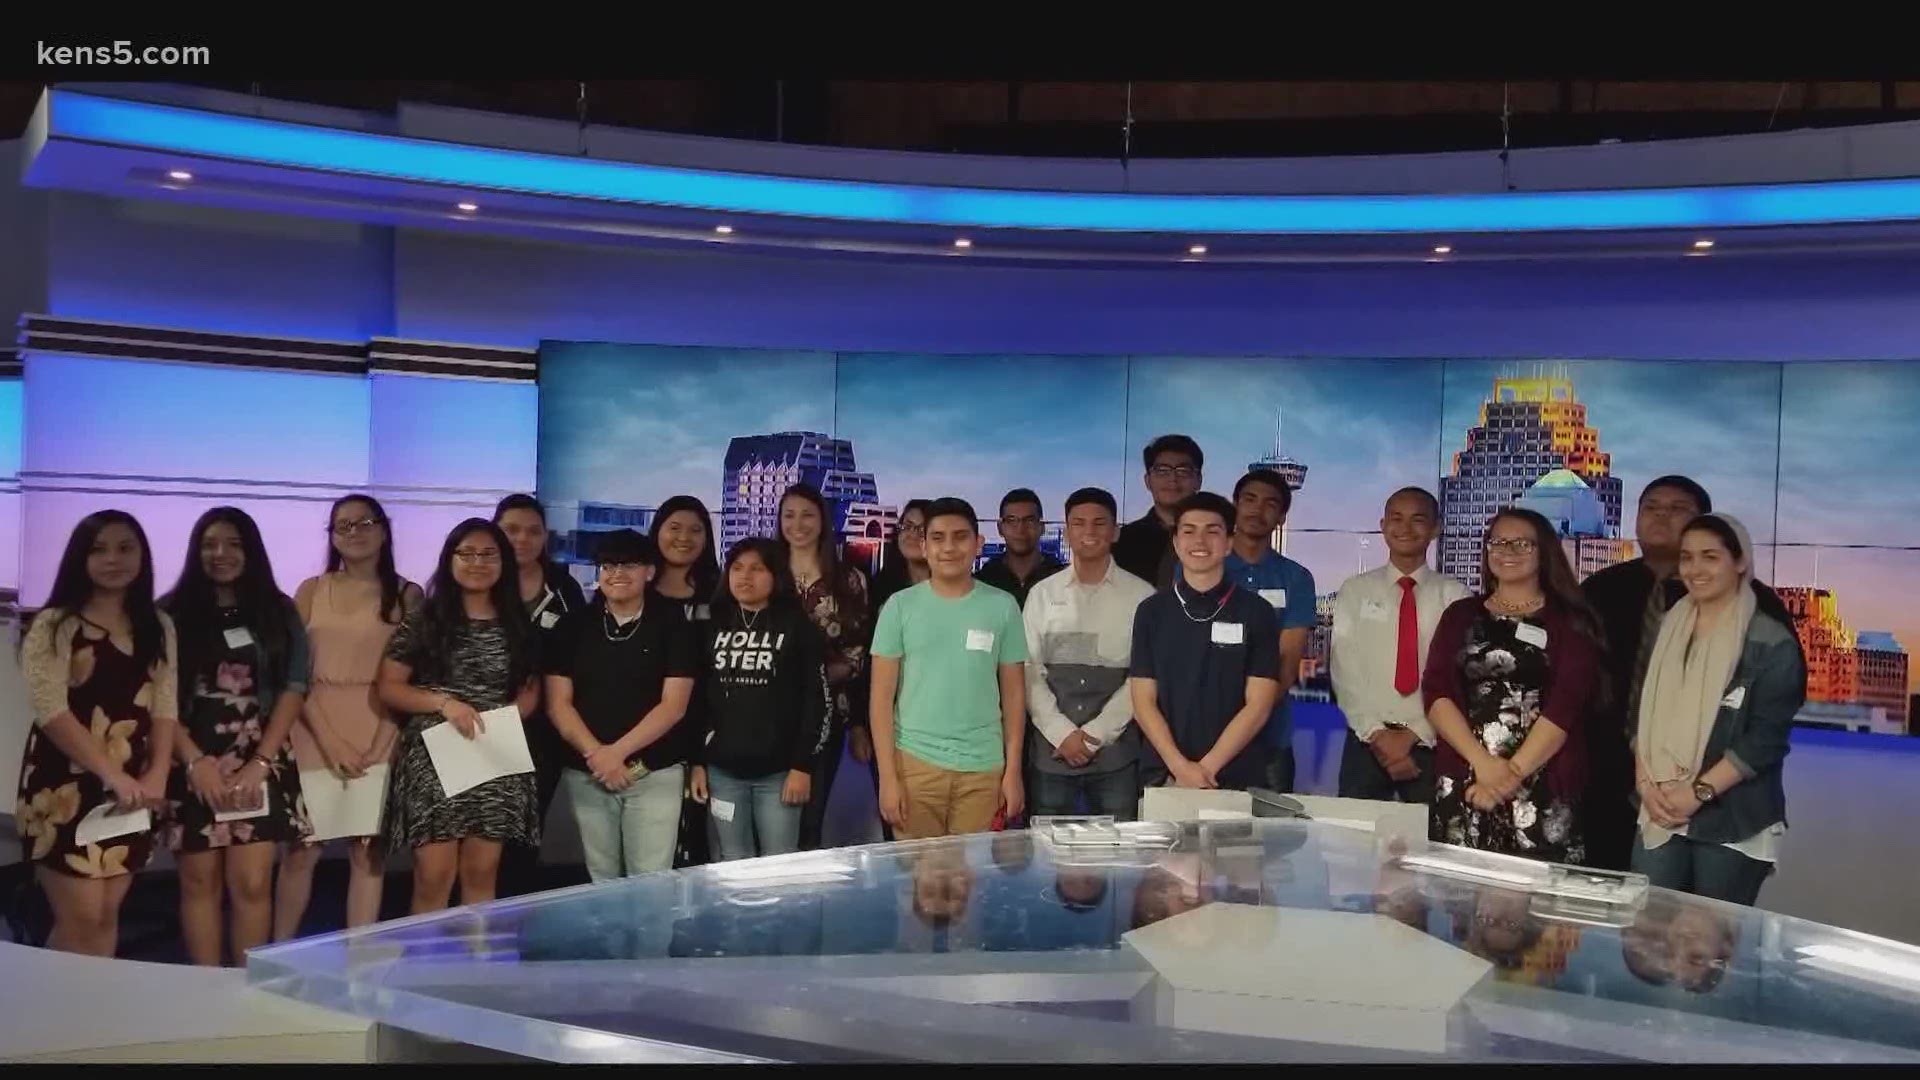 Four years ago, KENS 5 staffers took on the challenge of mentoring a group of high school freshman. This year, their journeys are complete.